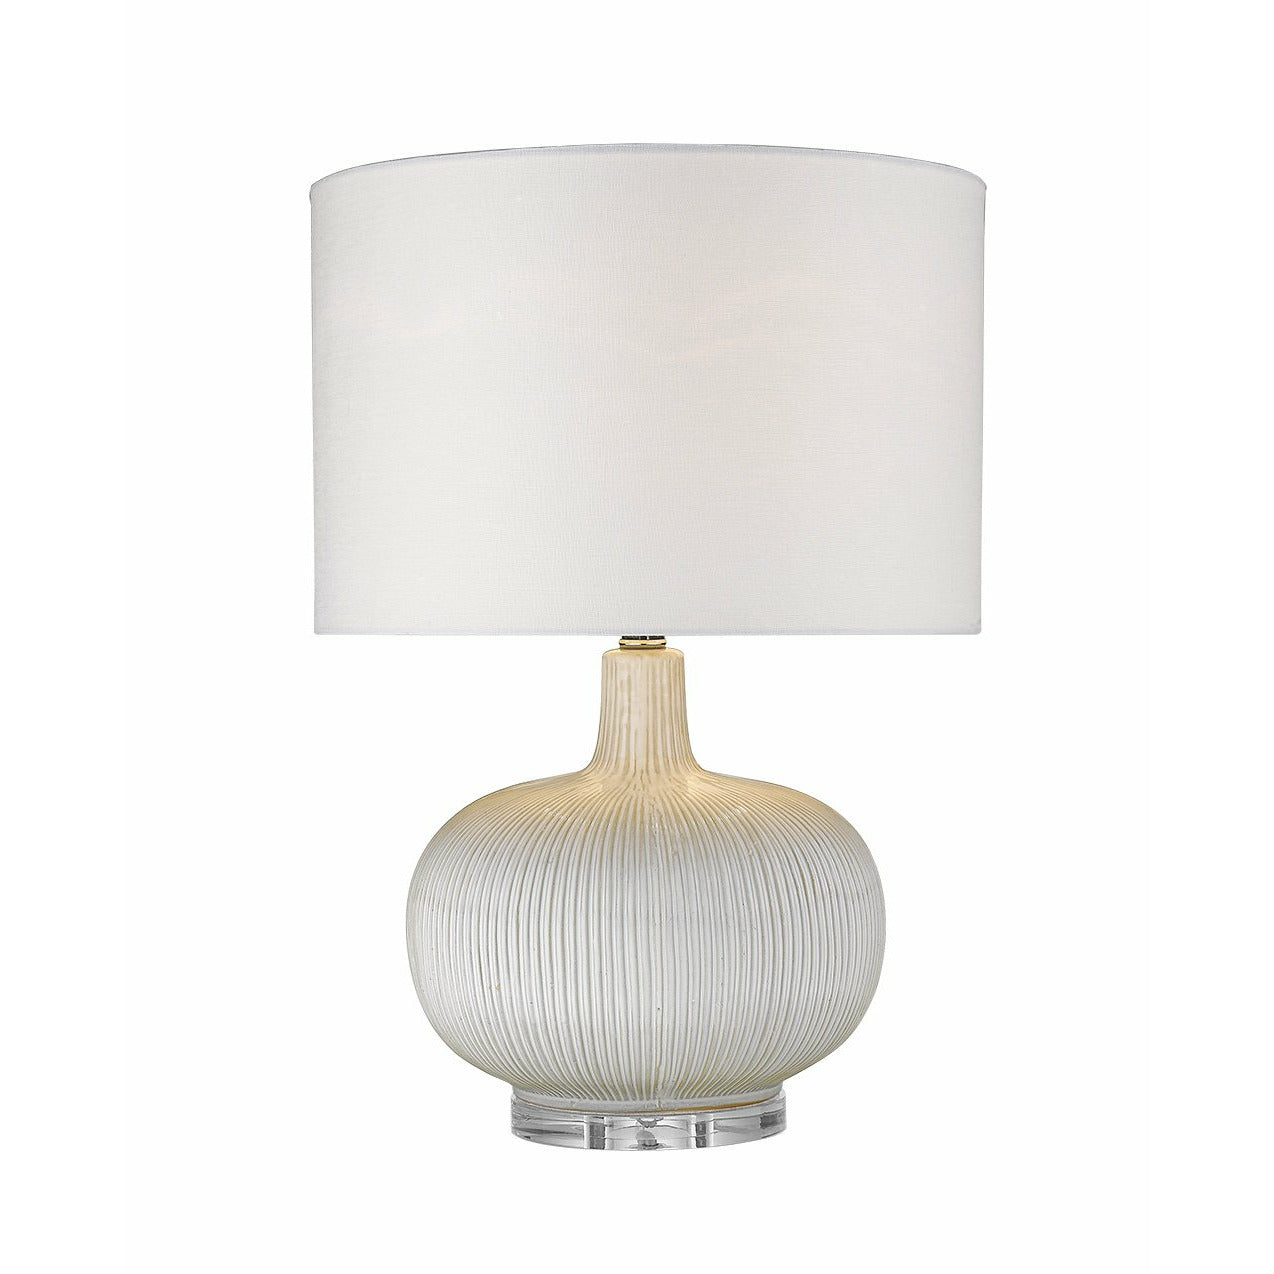 Trend Home Table Lamp Polished Nickel